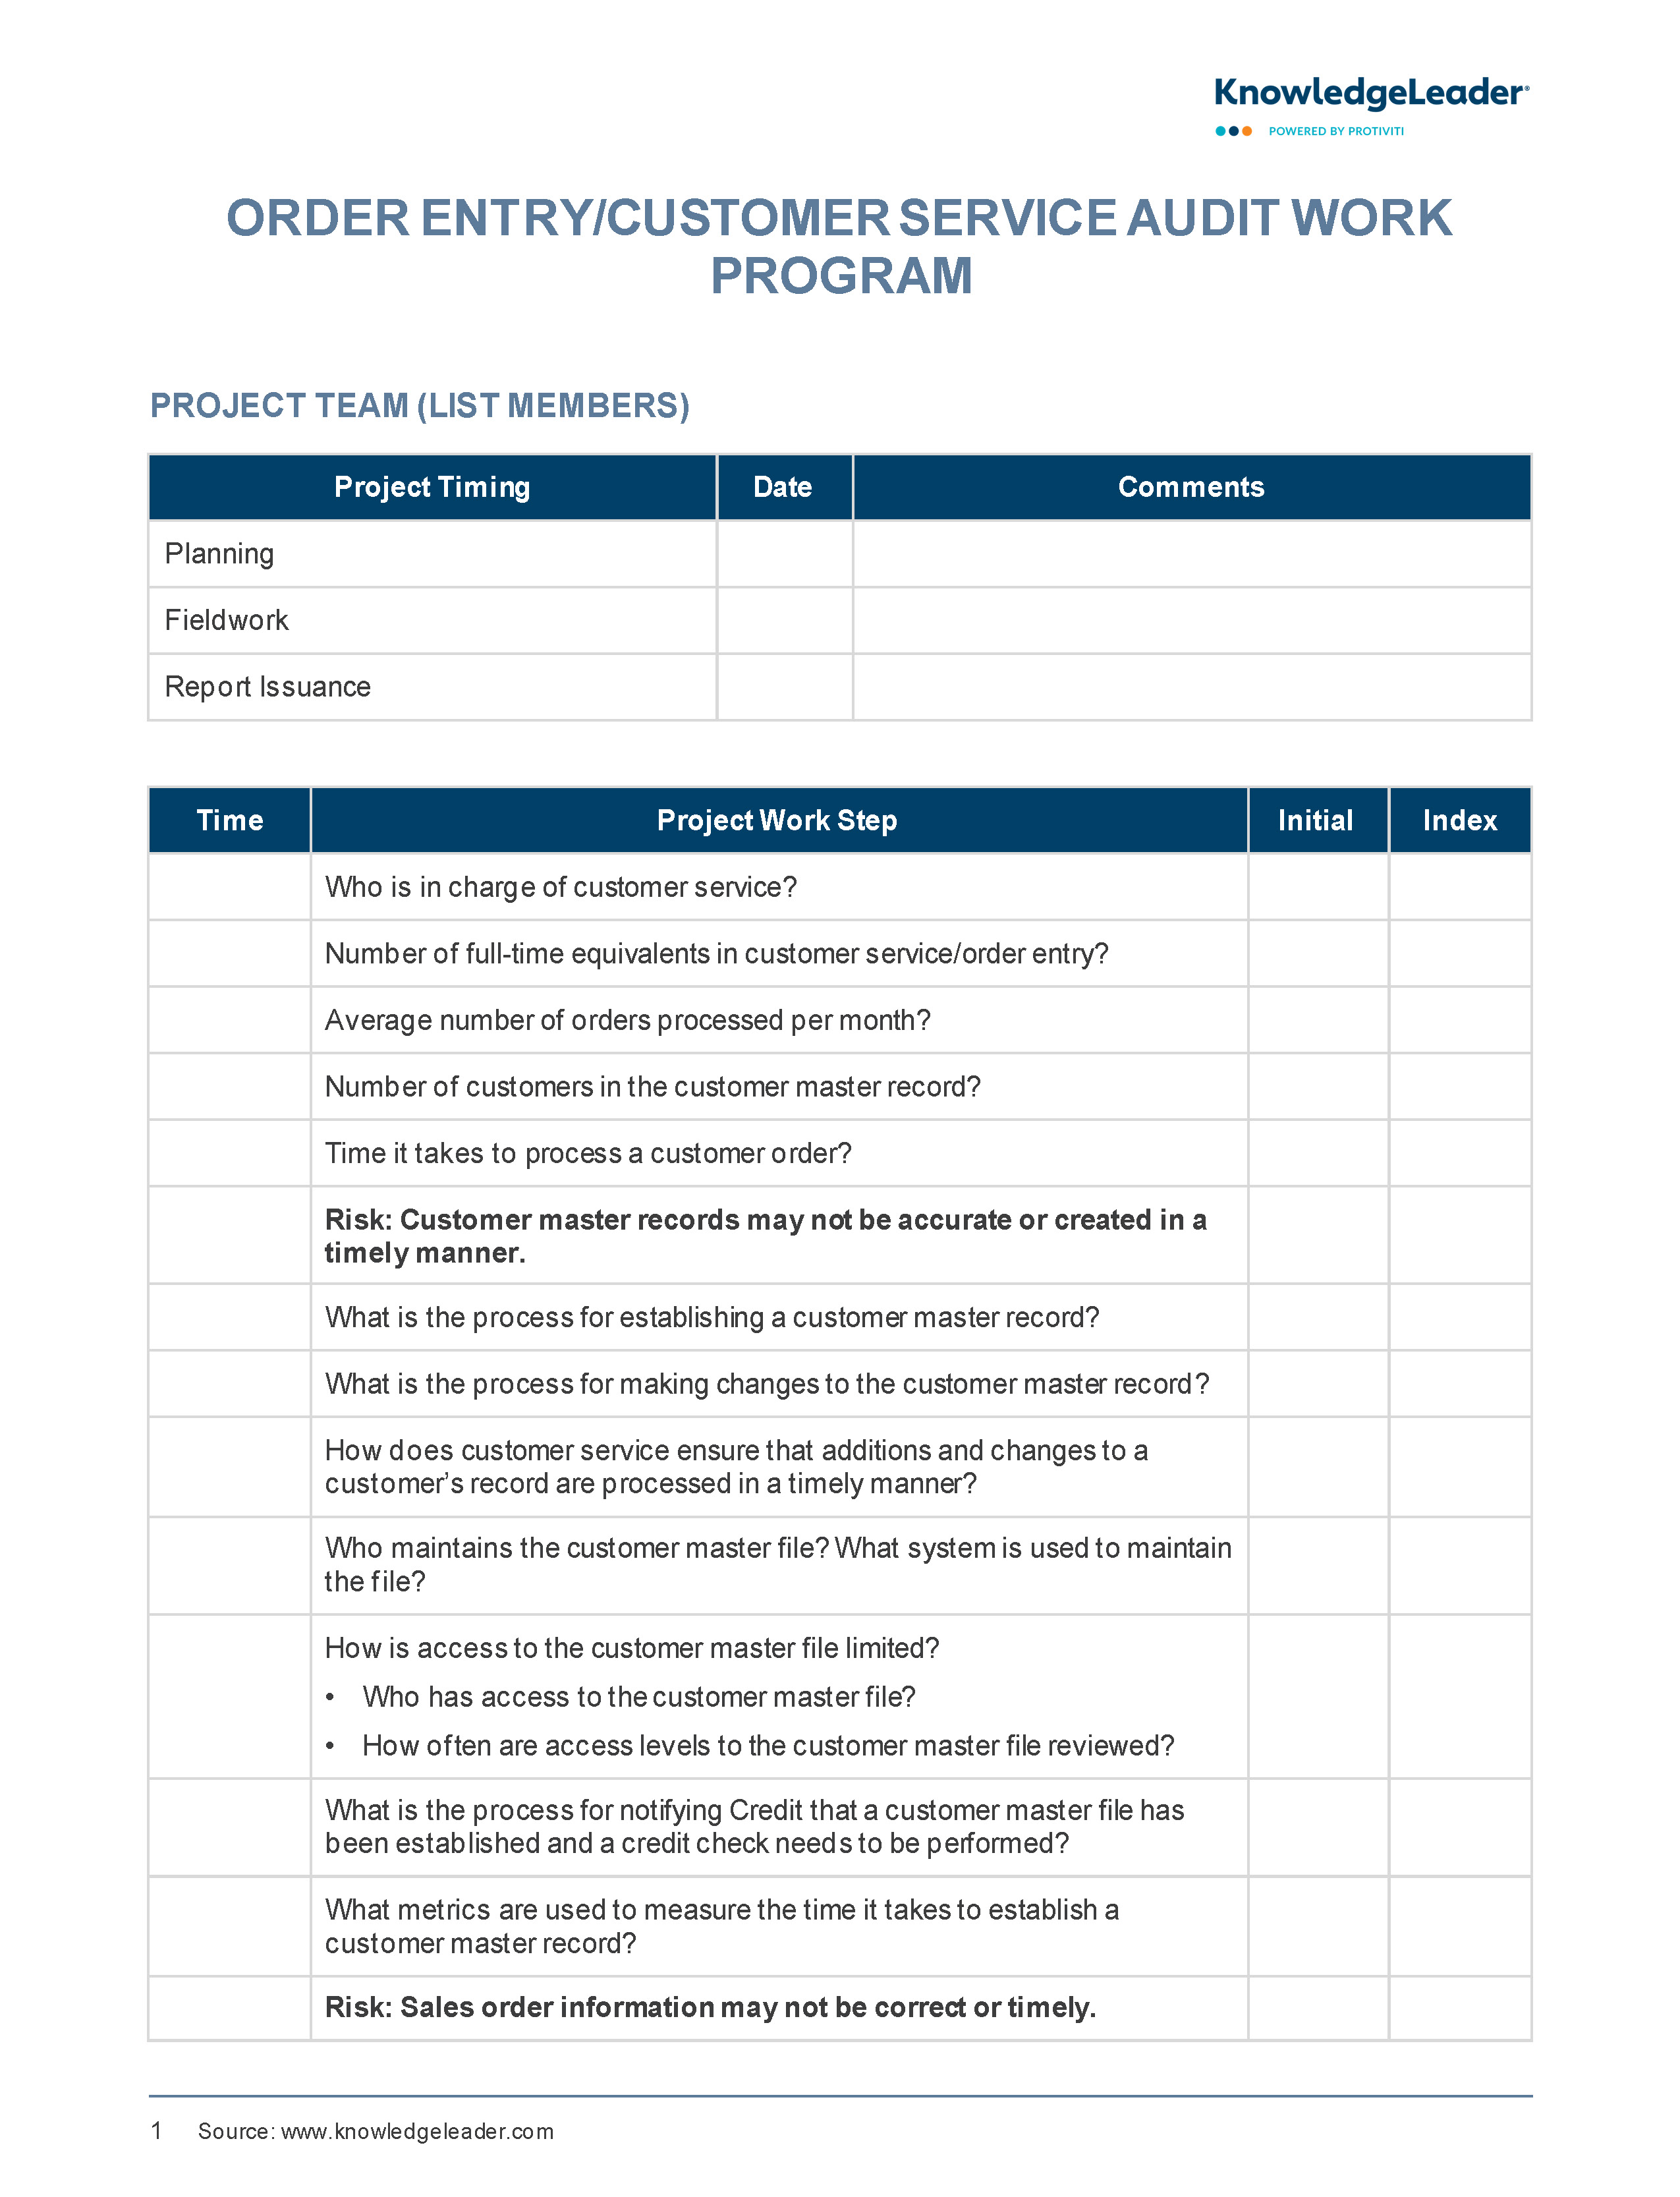 Screenshot of the first page of Order Entry Customer Service Audit Work Program